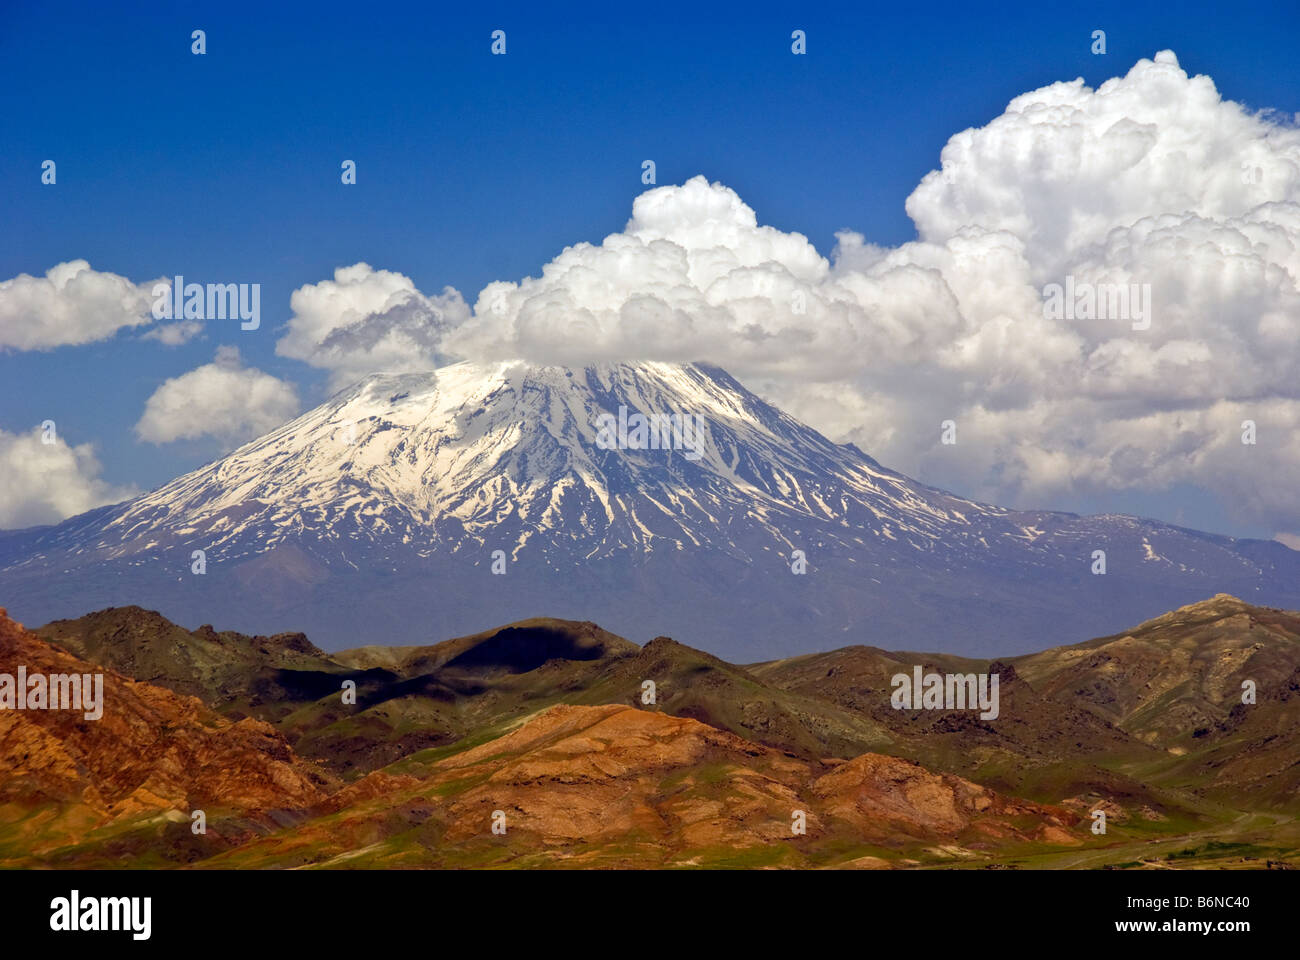 Mt. Ararat, snow capped dormant volcano and site of Noah Biblical story, partially obscured by clouds Stock Photo